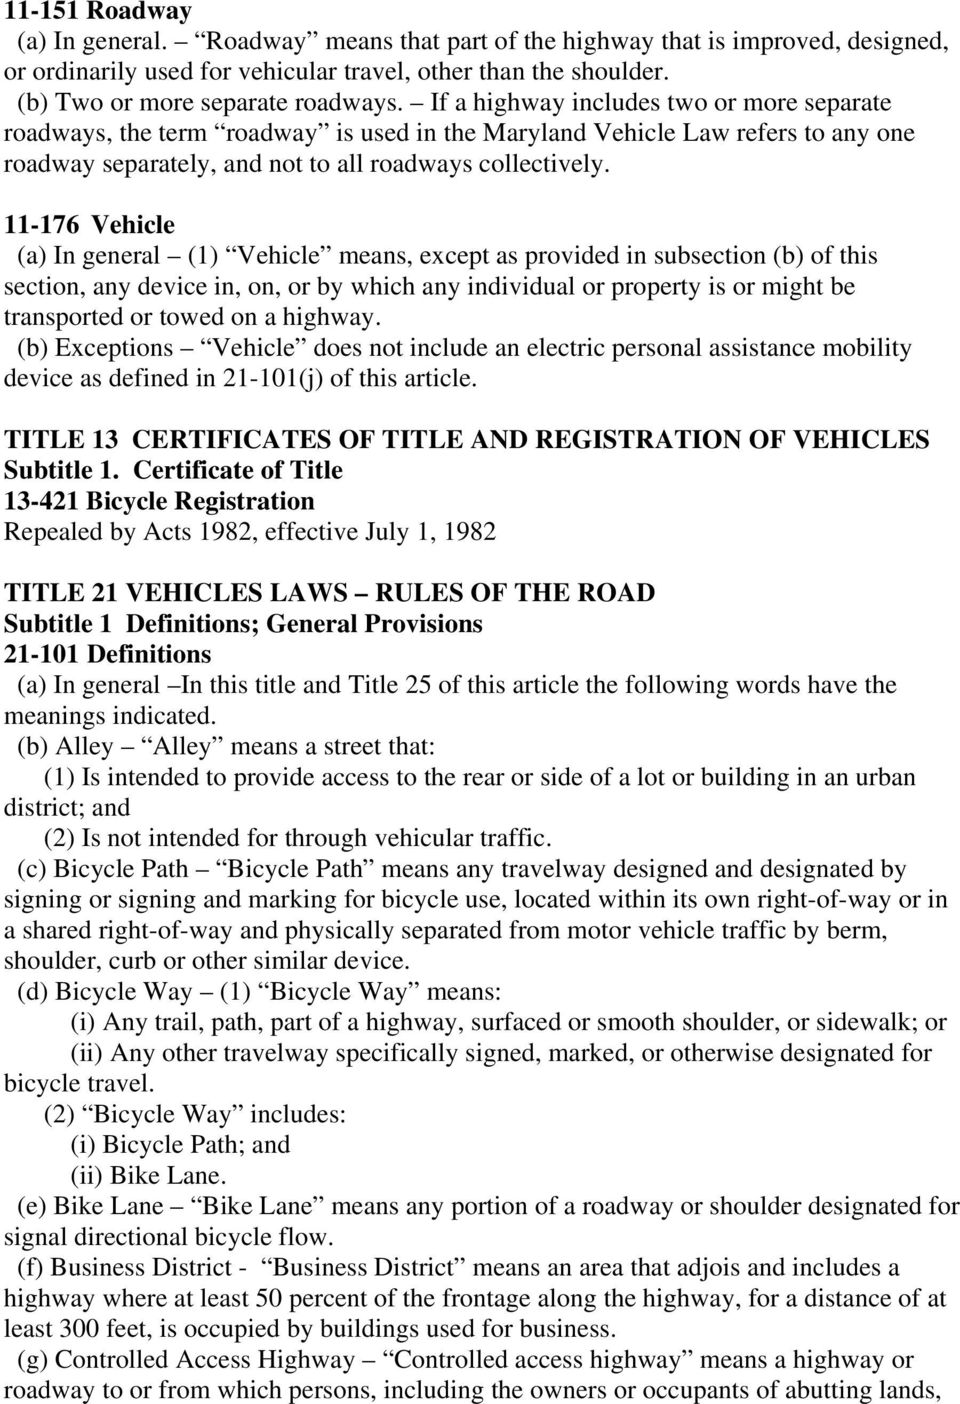 11-176 Vehicle (a) In general (1) Vehicle means, except as provided in subsection (b) of this section, any device in, on, or by which any individual or property is or might be transported or towed on